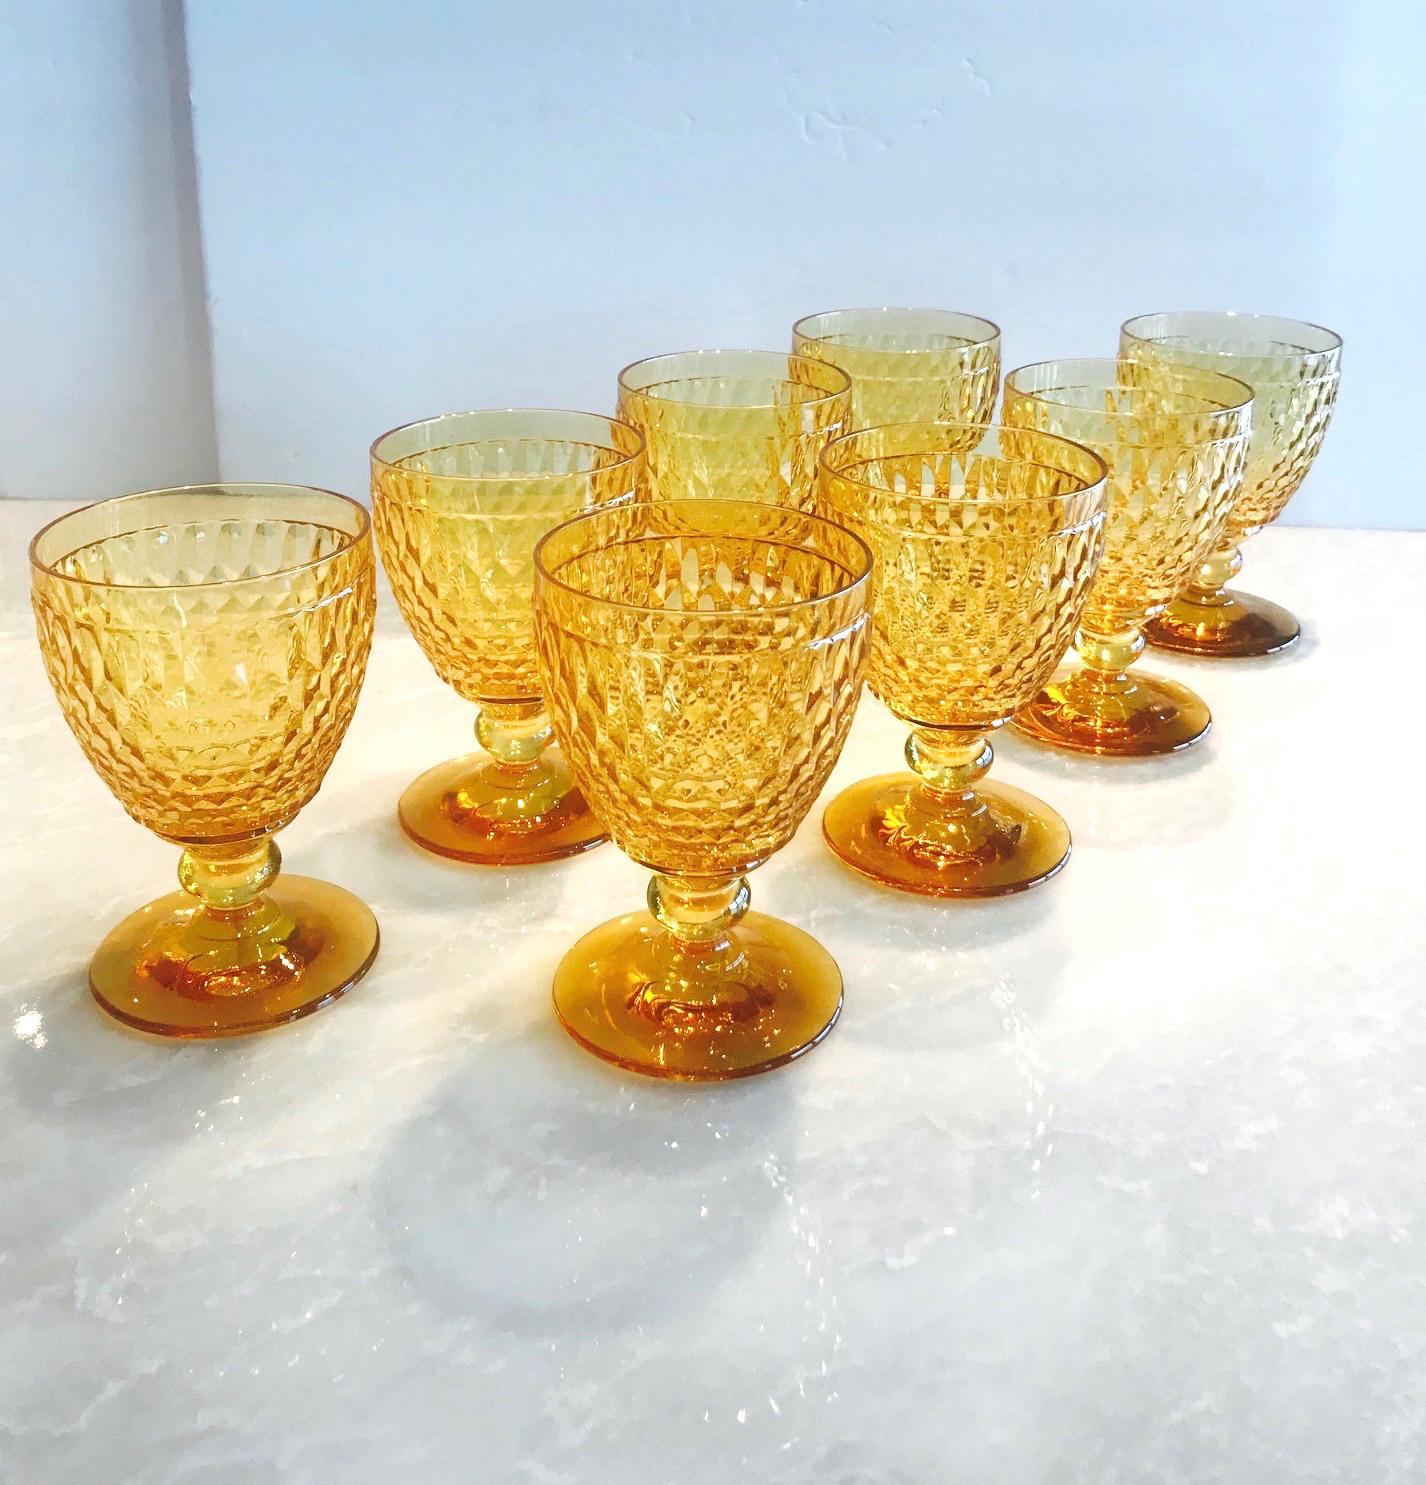 Set of 8 luxury large crystal goblets from Villeroy & Boch's Boston series. The stemware glasses are comprised of hobnail crystal with classic diamond patterns and deliberate short stems. In gorgeous amber colored crystal, making them a unique and